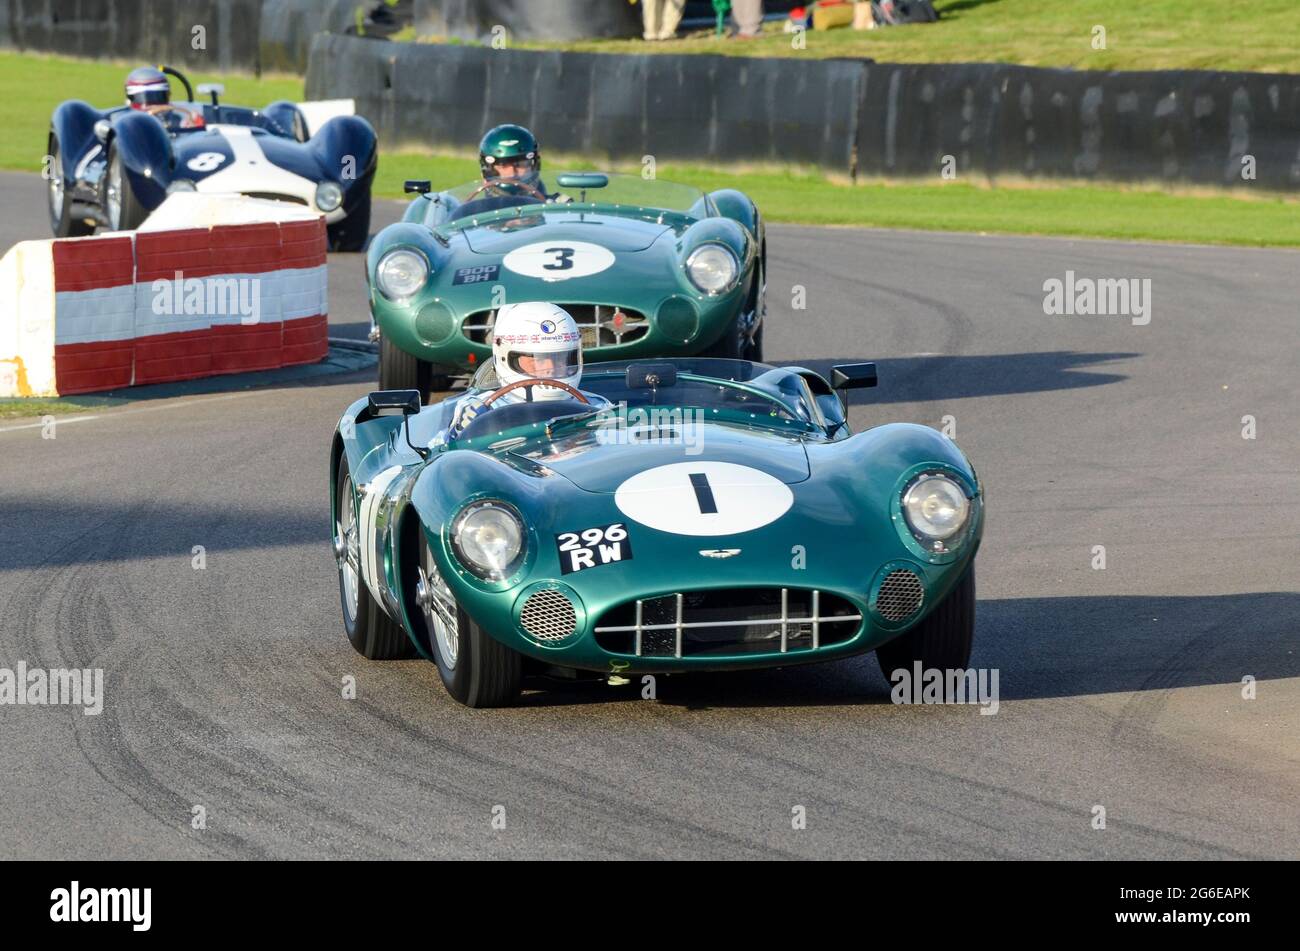 Aston Martin DBR1/1 classic sports car, vintage racing car competing in the Sussex Trophy at the Goodwood Revival historic event, UK. Cars chasing Stock Photo